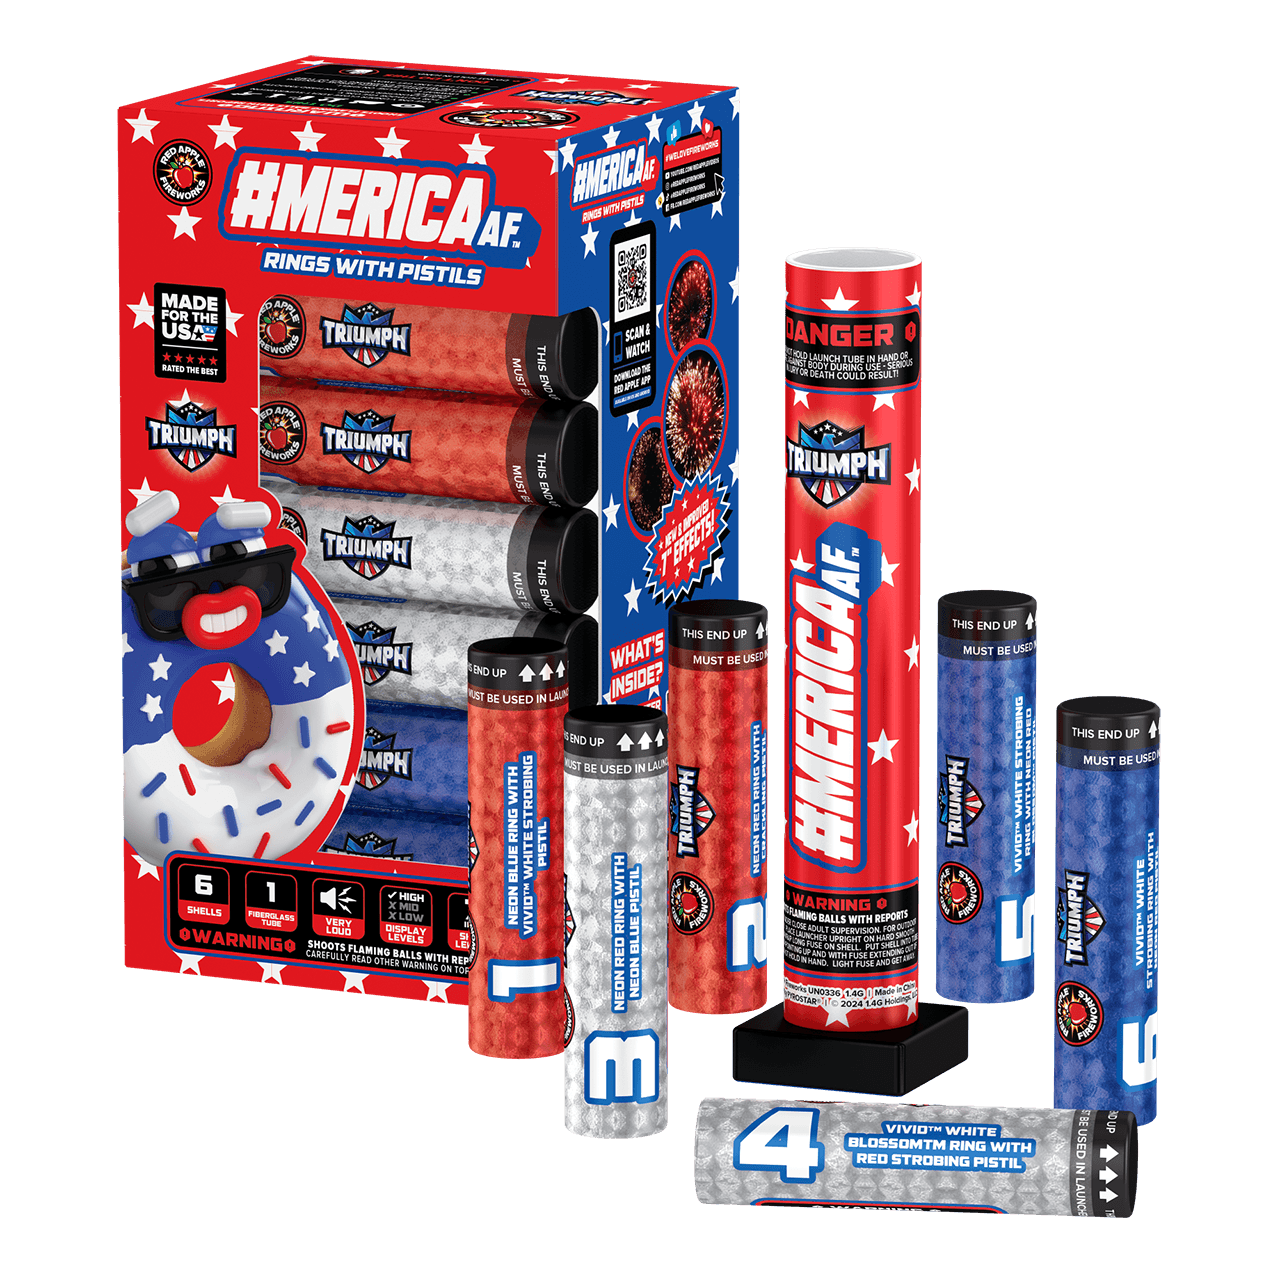 #MericaAF™ 7" Red, White & Blue Canister Shells